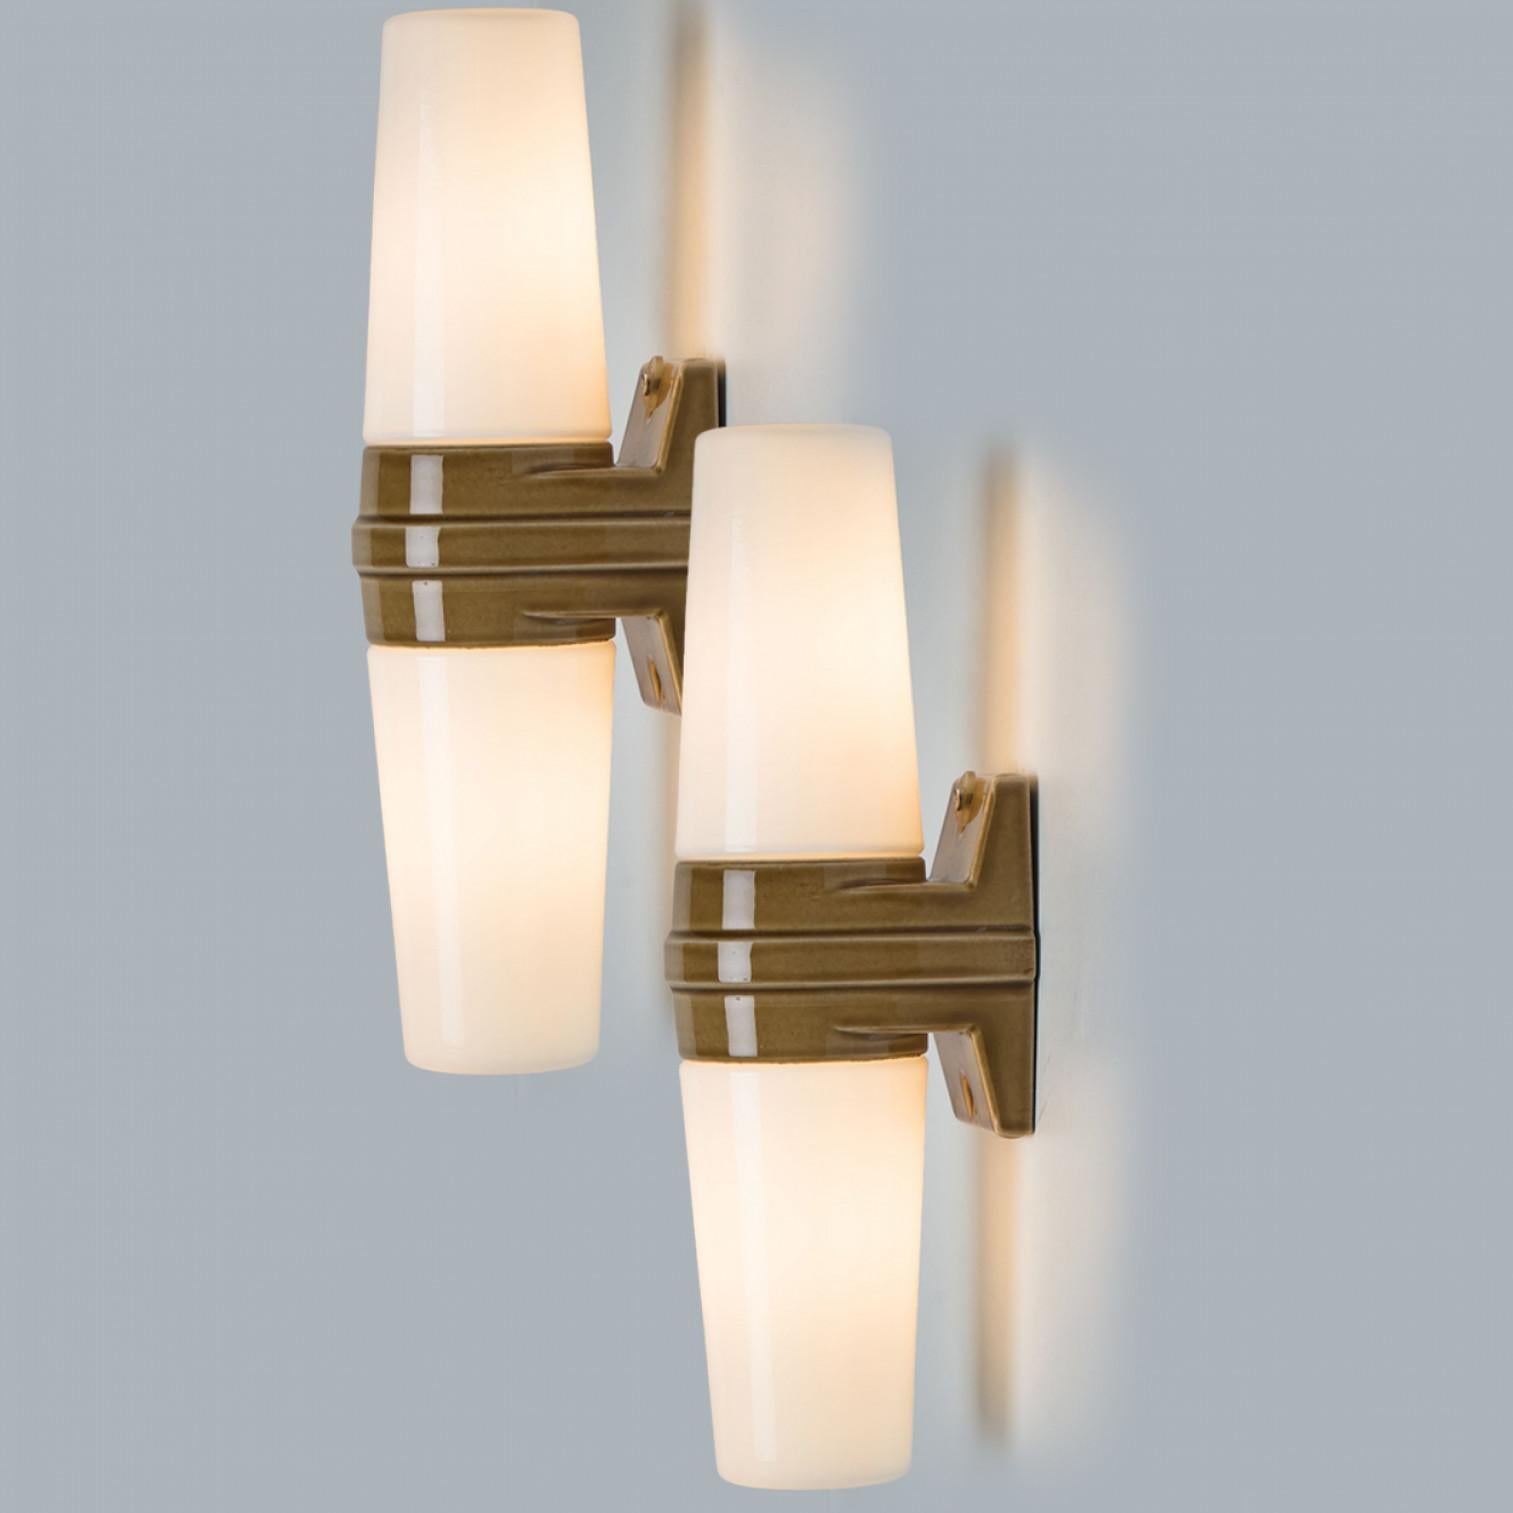 Mid-Century Modern Pair of White and Brown Ceramic Wall Lights, Sweden, 1970 For Sale